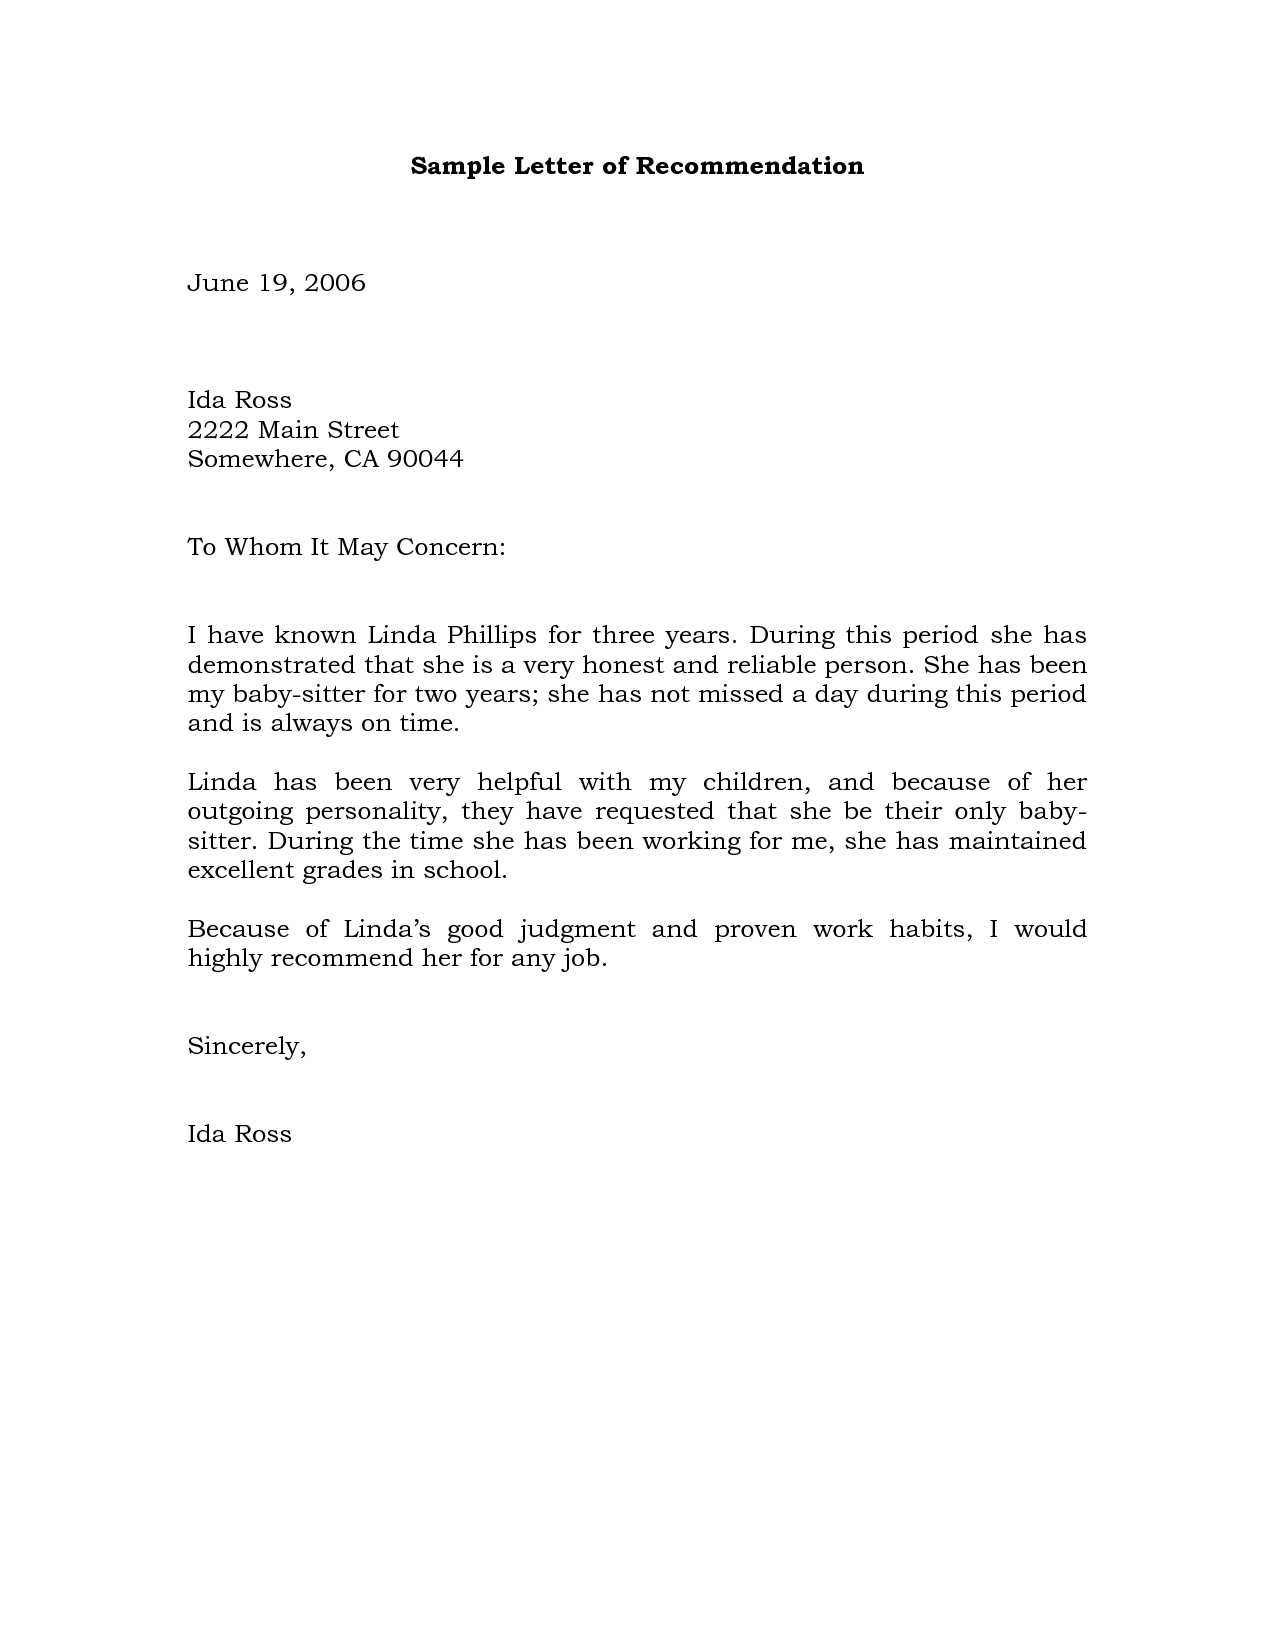 Sample Recommendation Letter Example Reference Letter for measurements 1275 X 1650